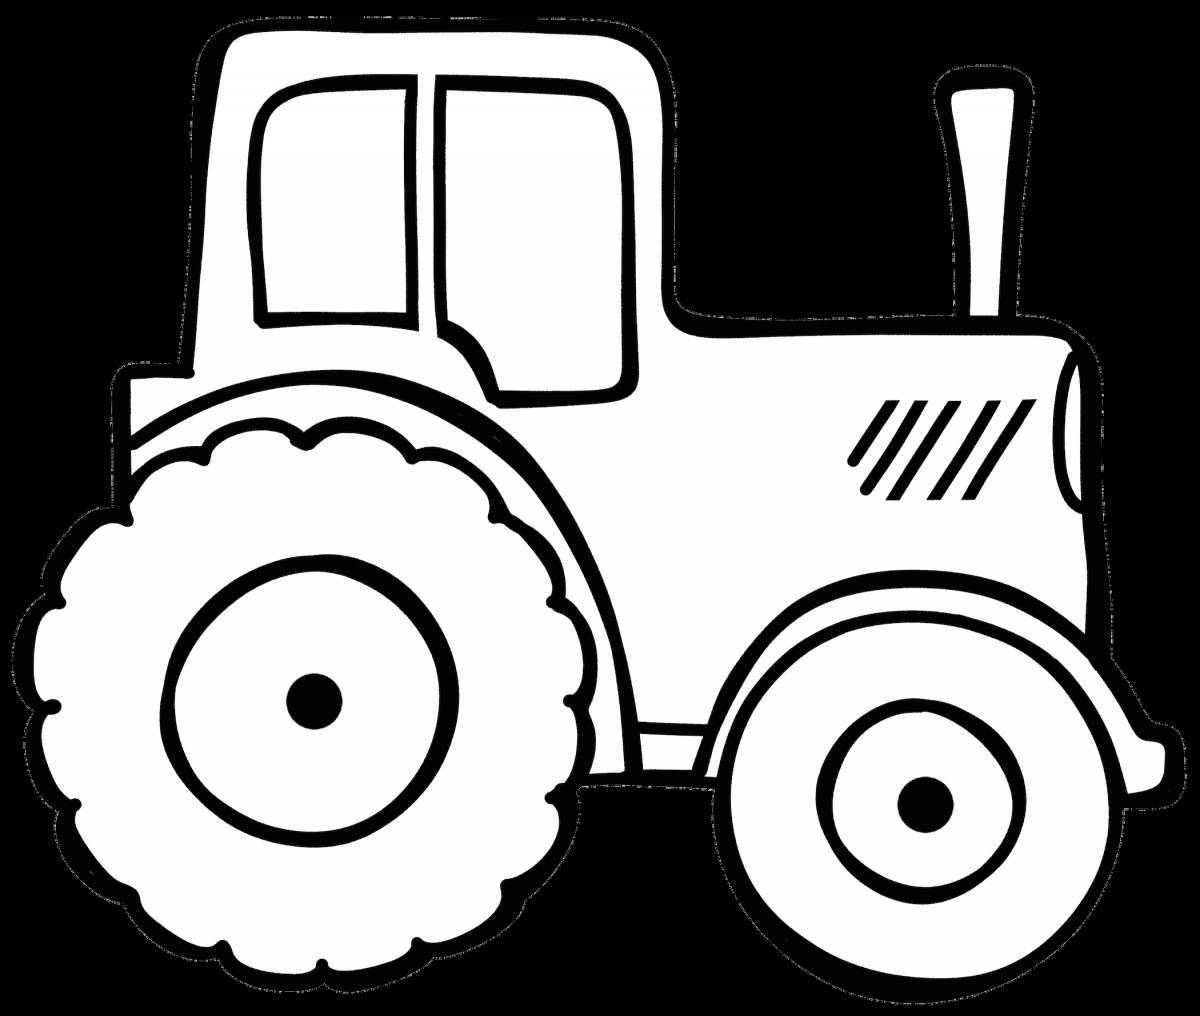 Bright blue tractor coloring page for pre-ks